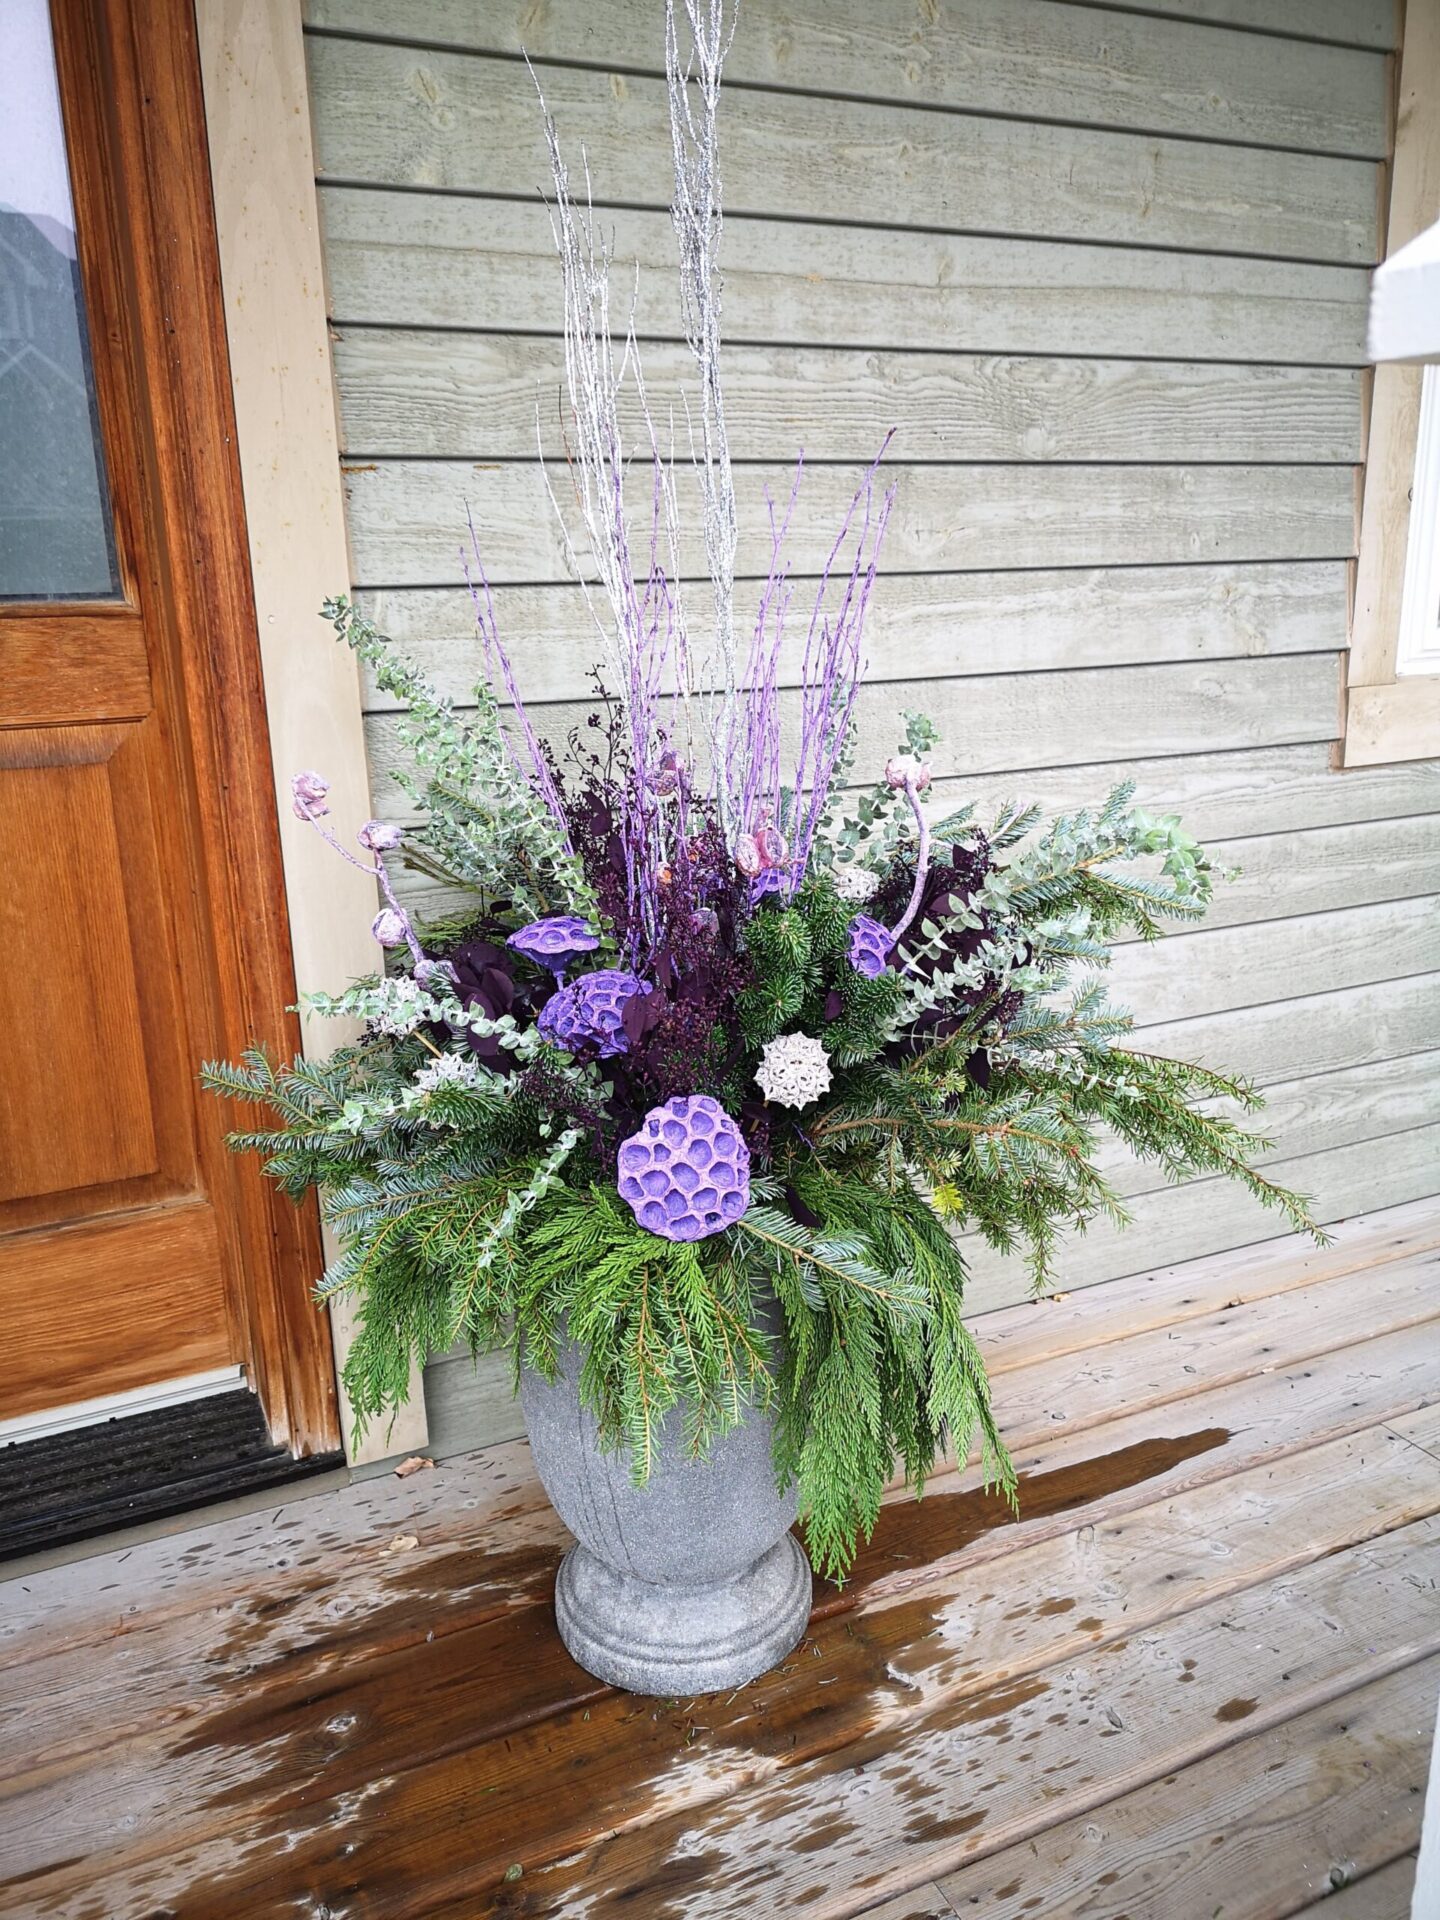 A decorative flower arrangement in a gray vase on a wet wooden porch, featuring purple flowers and greenery, with a wooden wall and door nearby.